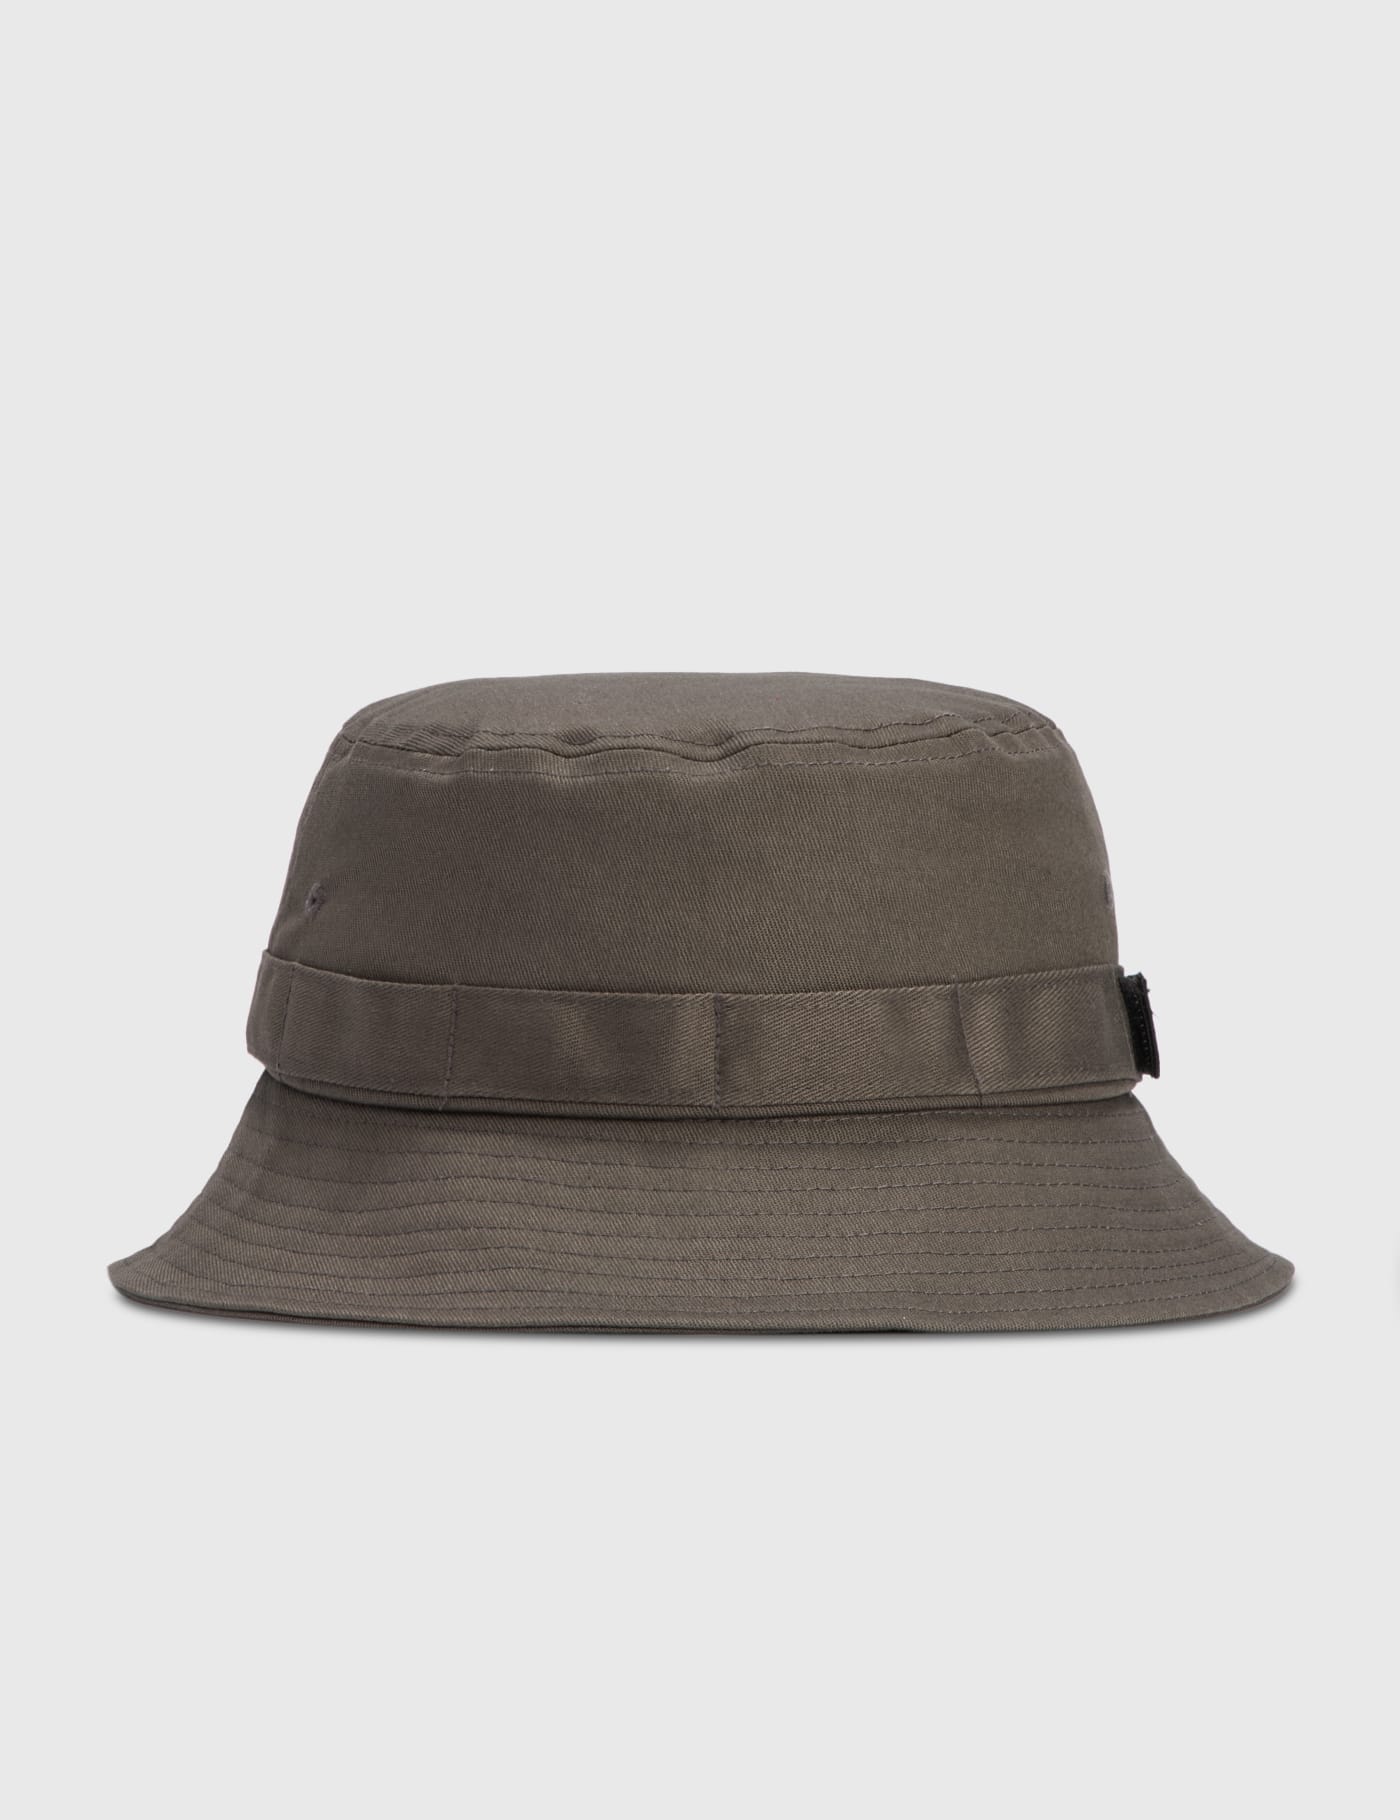 Bucket Hats | HBX - Globally Curated Fashion and Lifestyle by